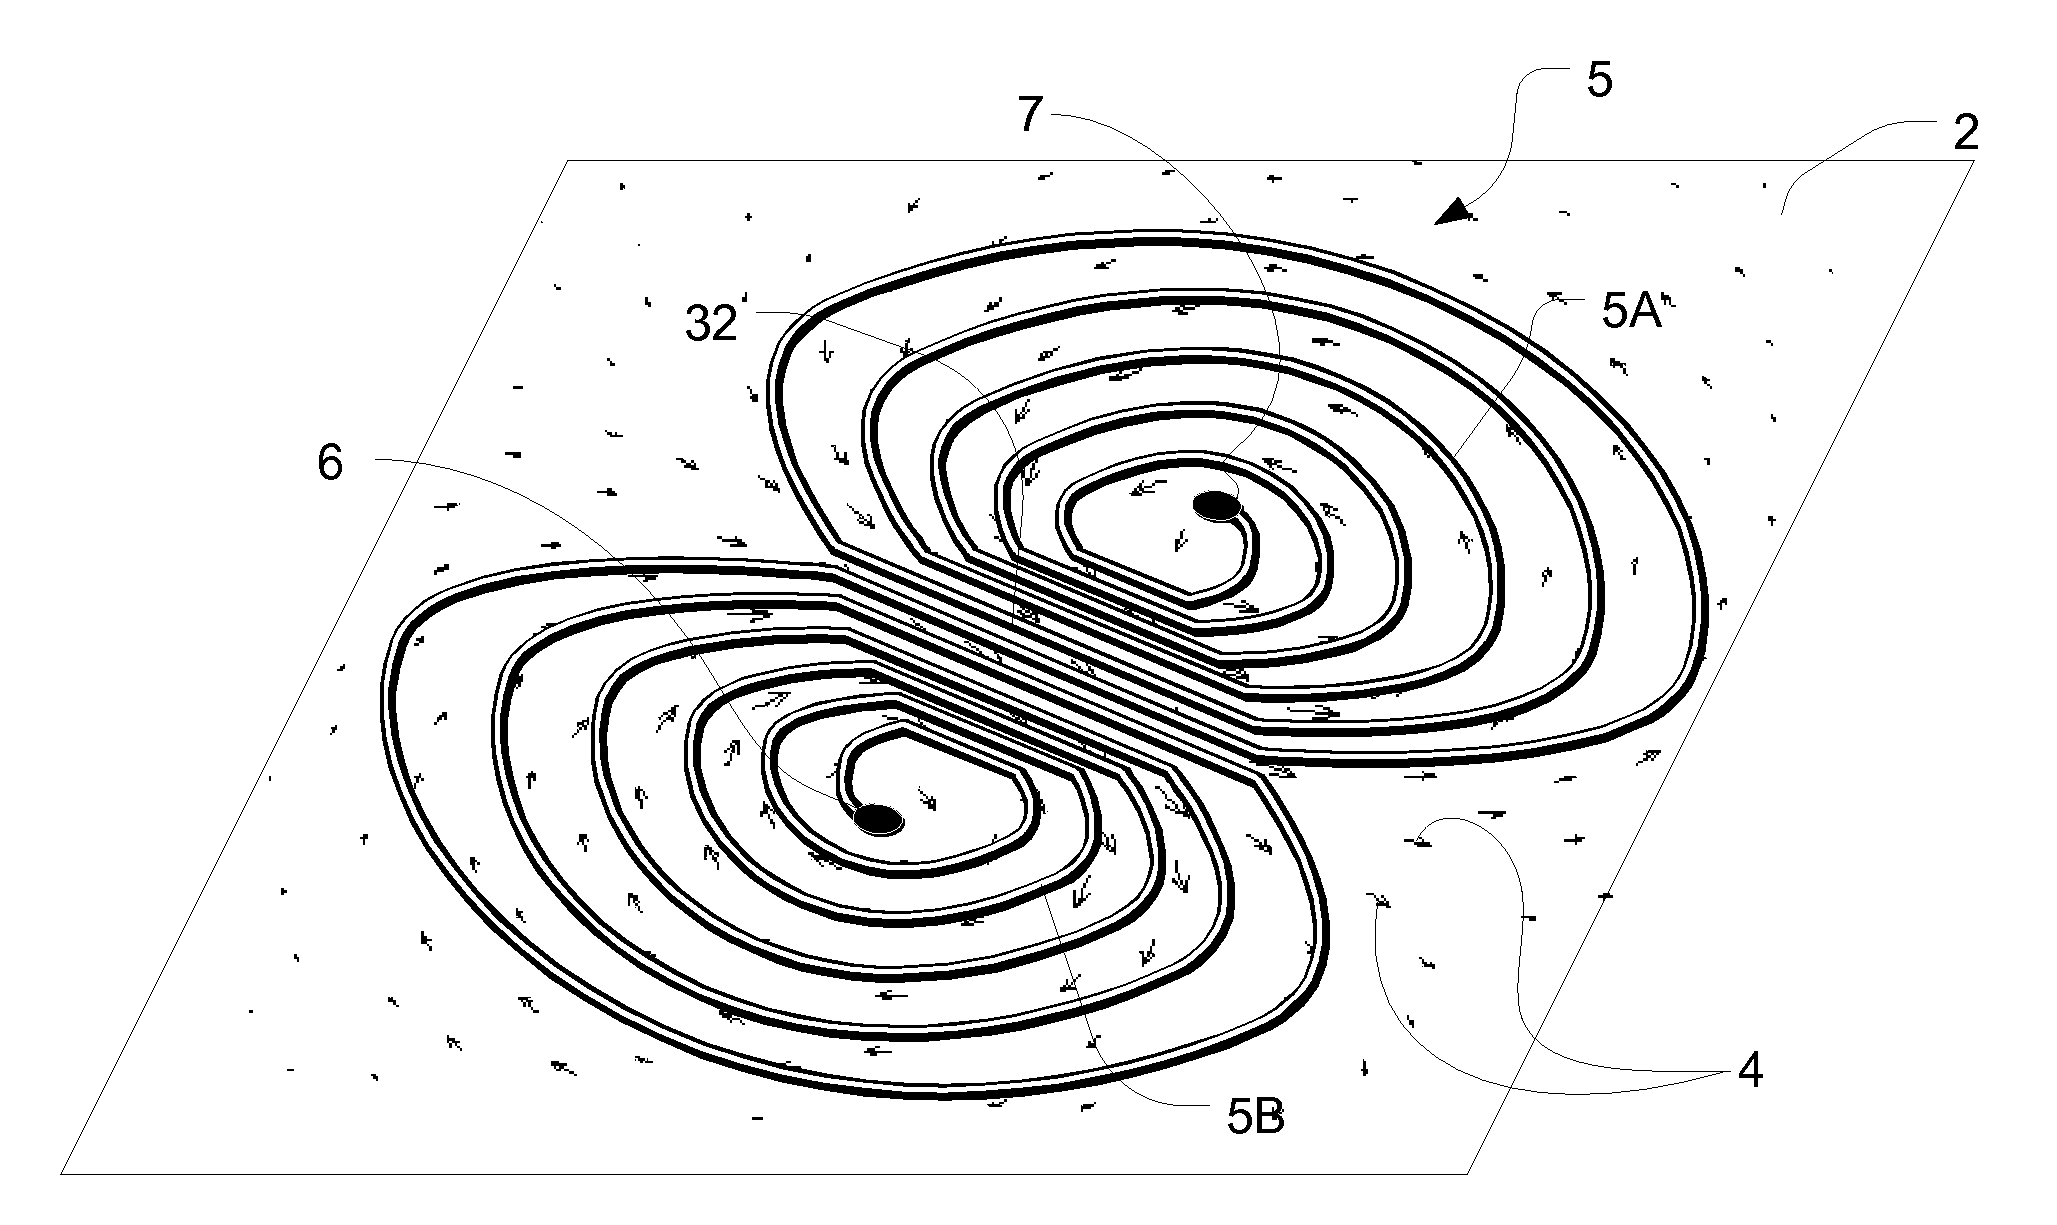 2d coil and a method of obtaining ec response of 3D coils using the 2d coil configuration